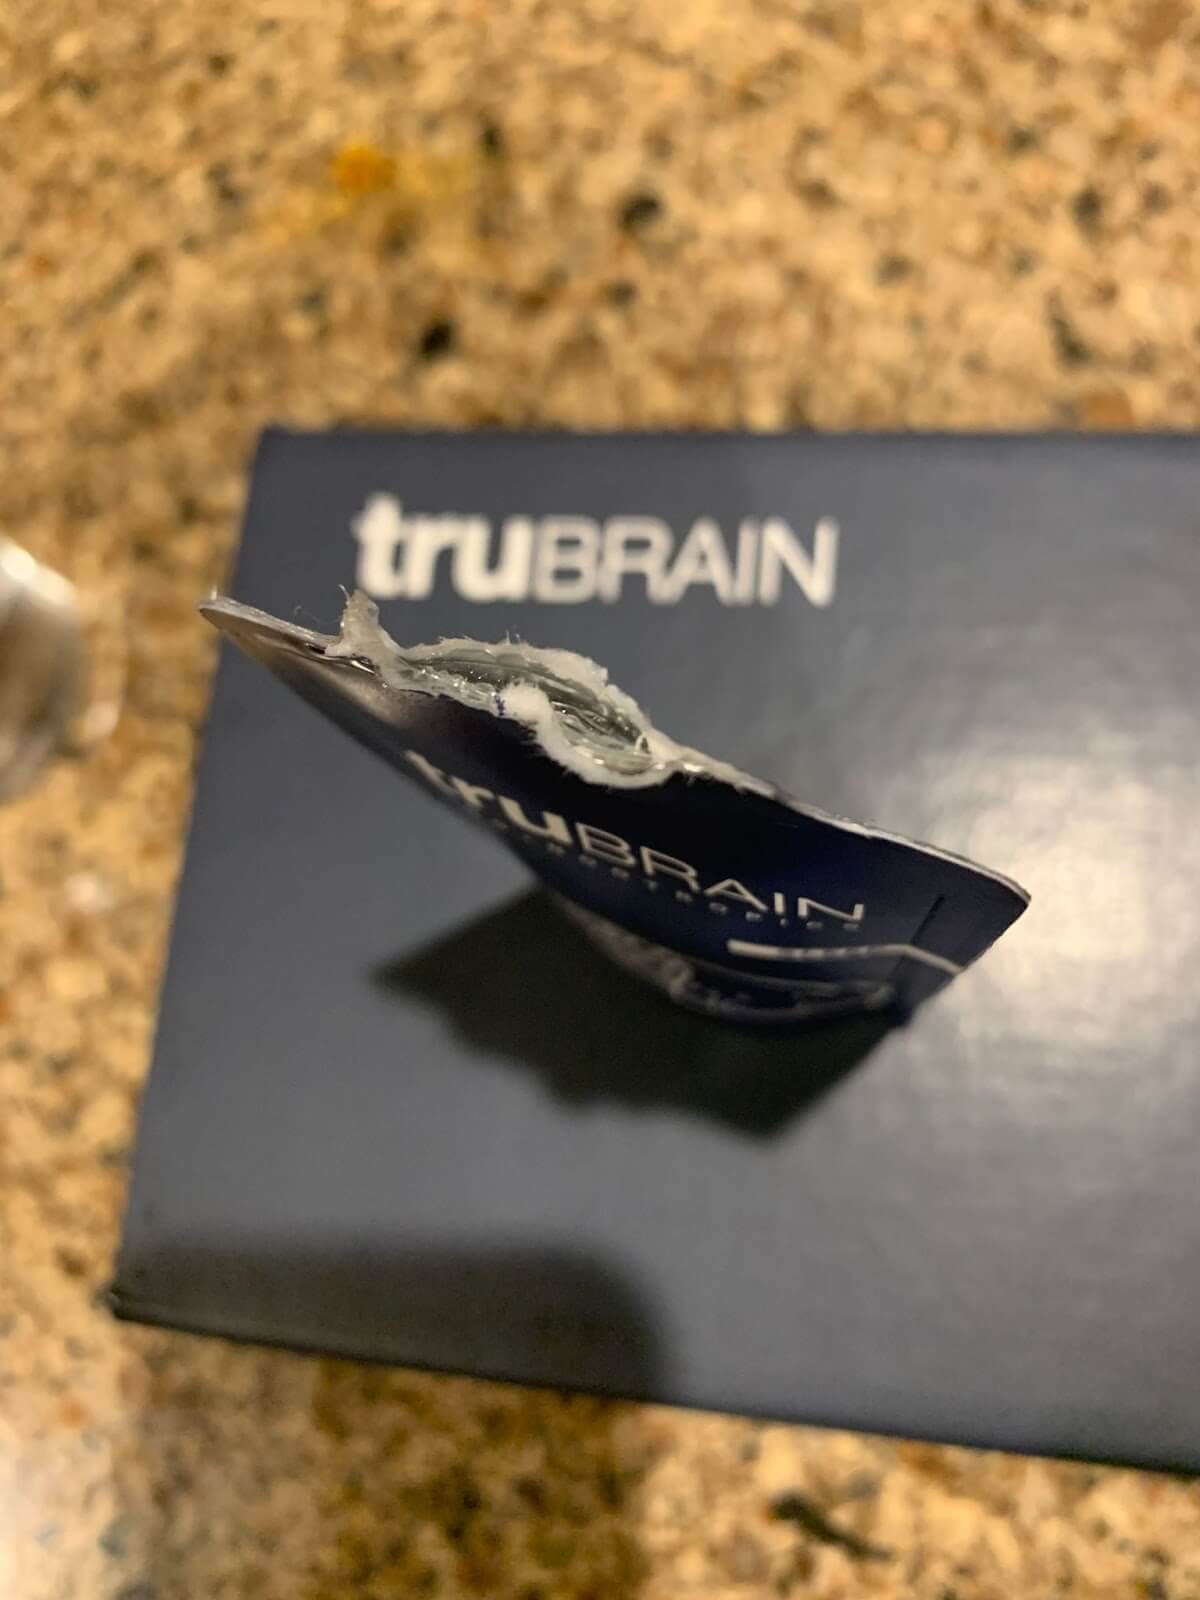 tru brain shot packaging is difficult to open and drink from